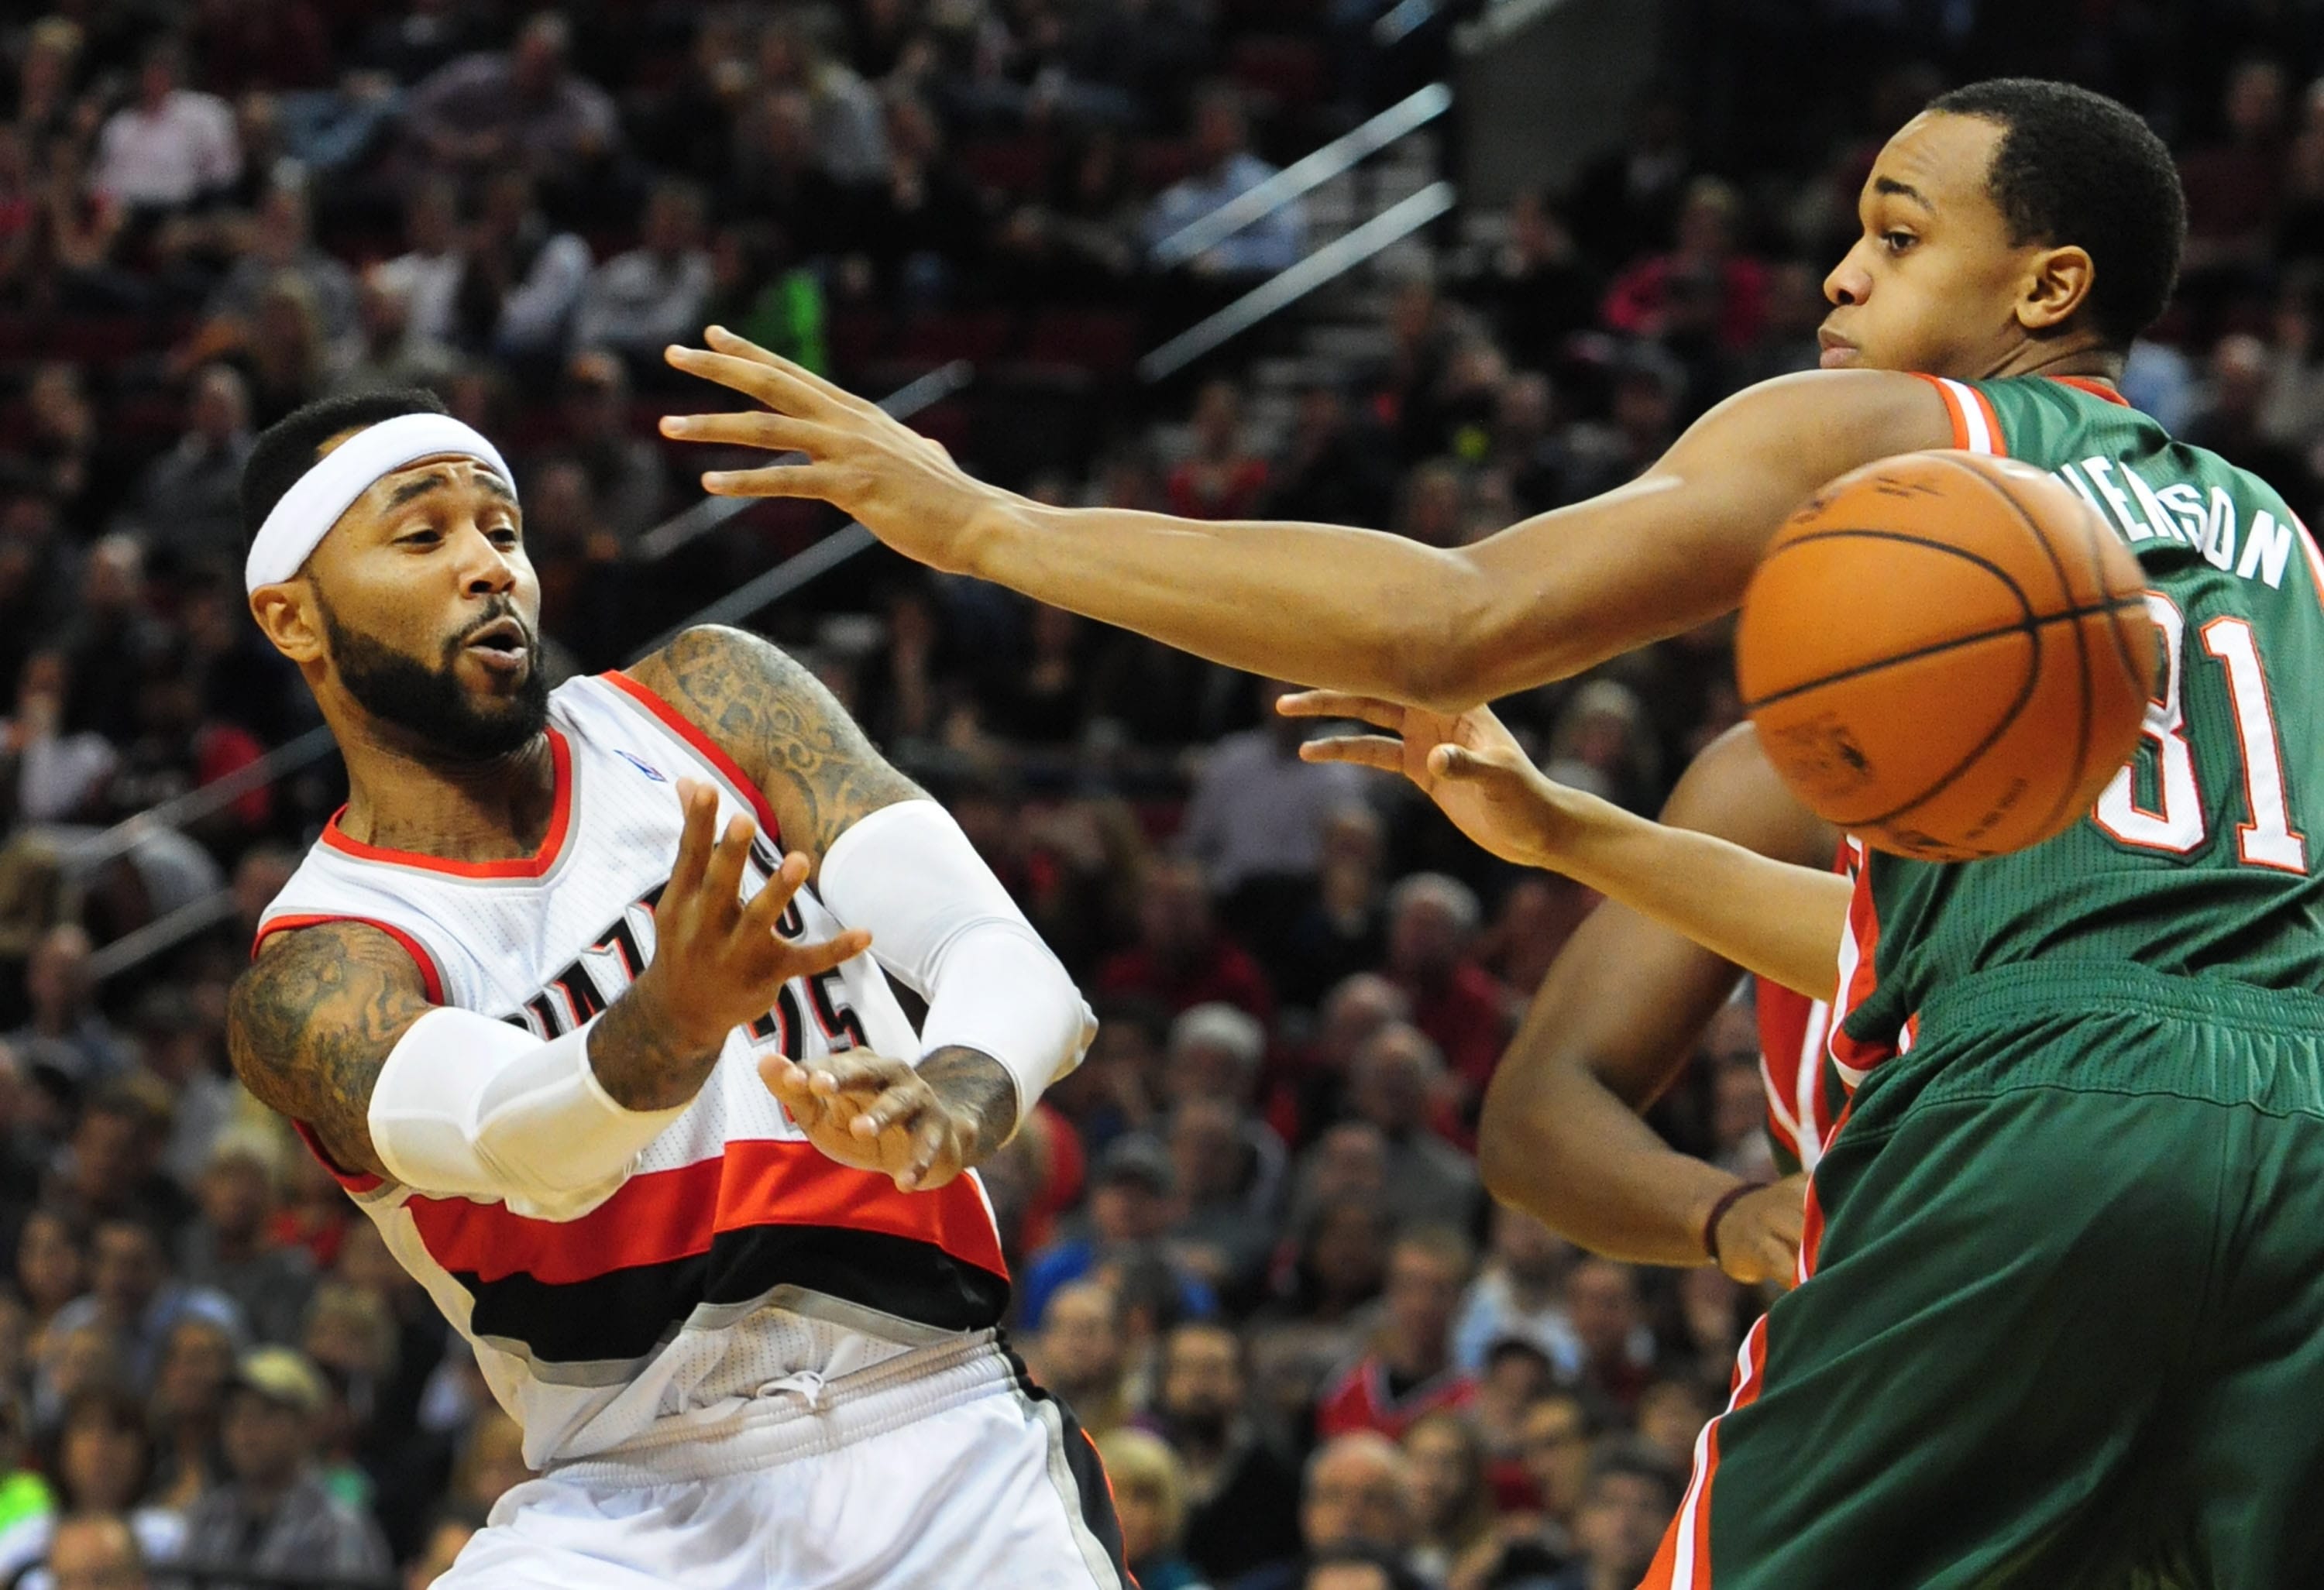 Portland Trail Blazers guard Mo Williams (25) passes the ball around Milwaukee Bucks center John Henson (31) during the second half of an NBA basketball game in Portland, Ore., Tuesday, March 18, 2014. The Blazers won the game 120-115 in overtime.